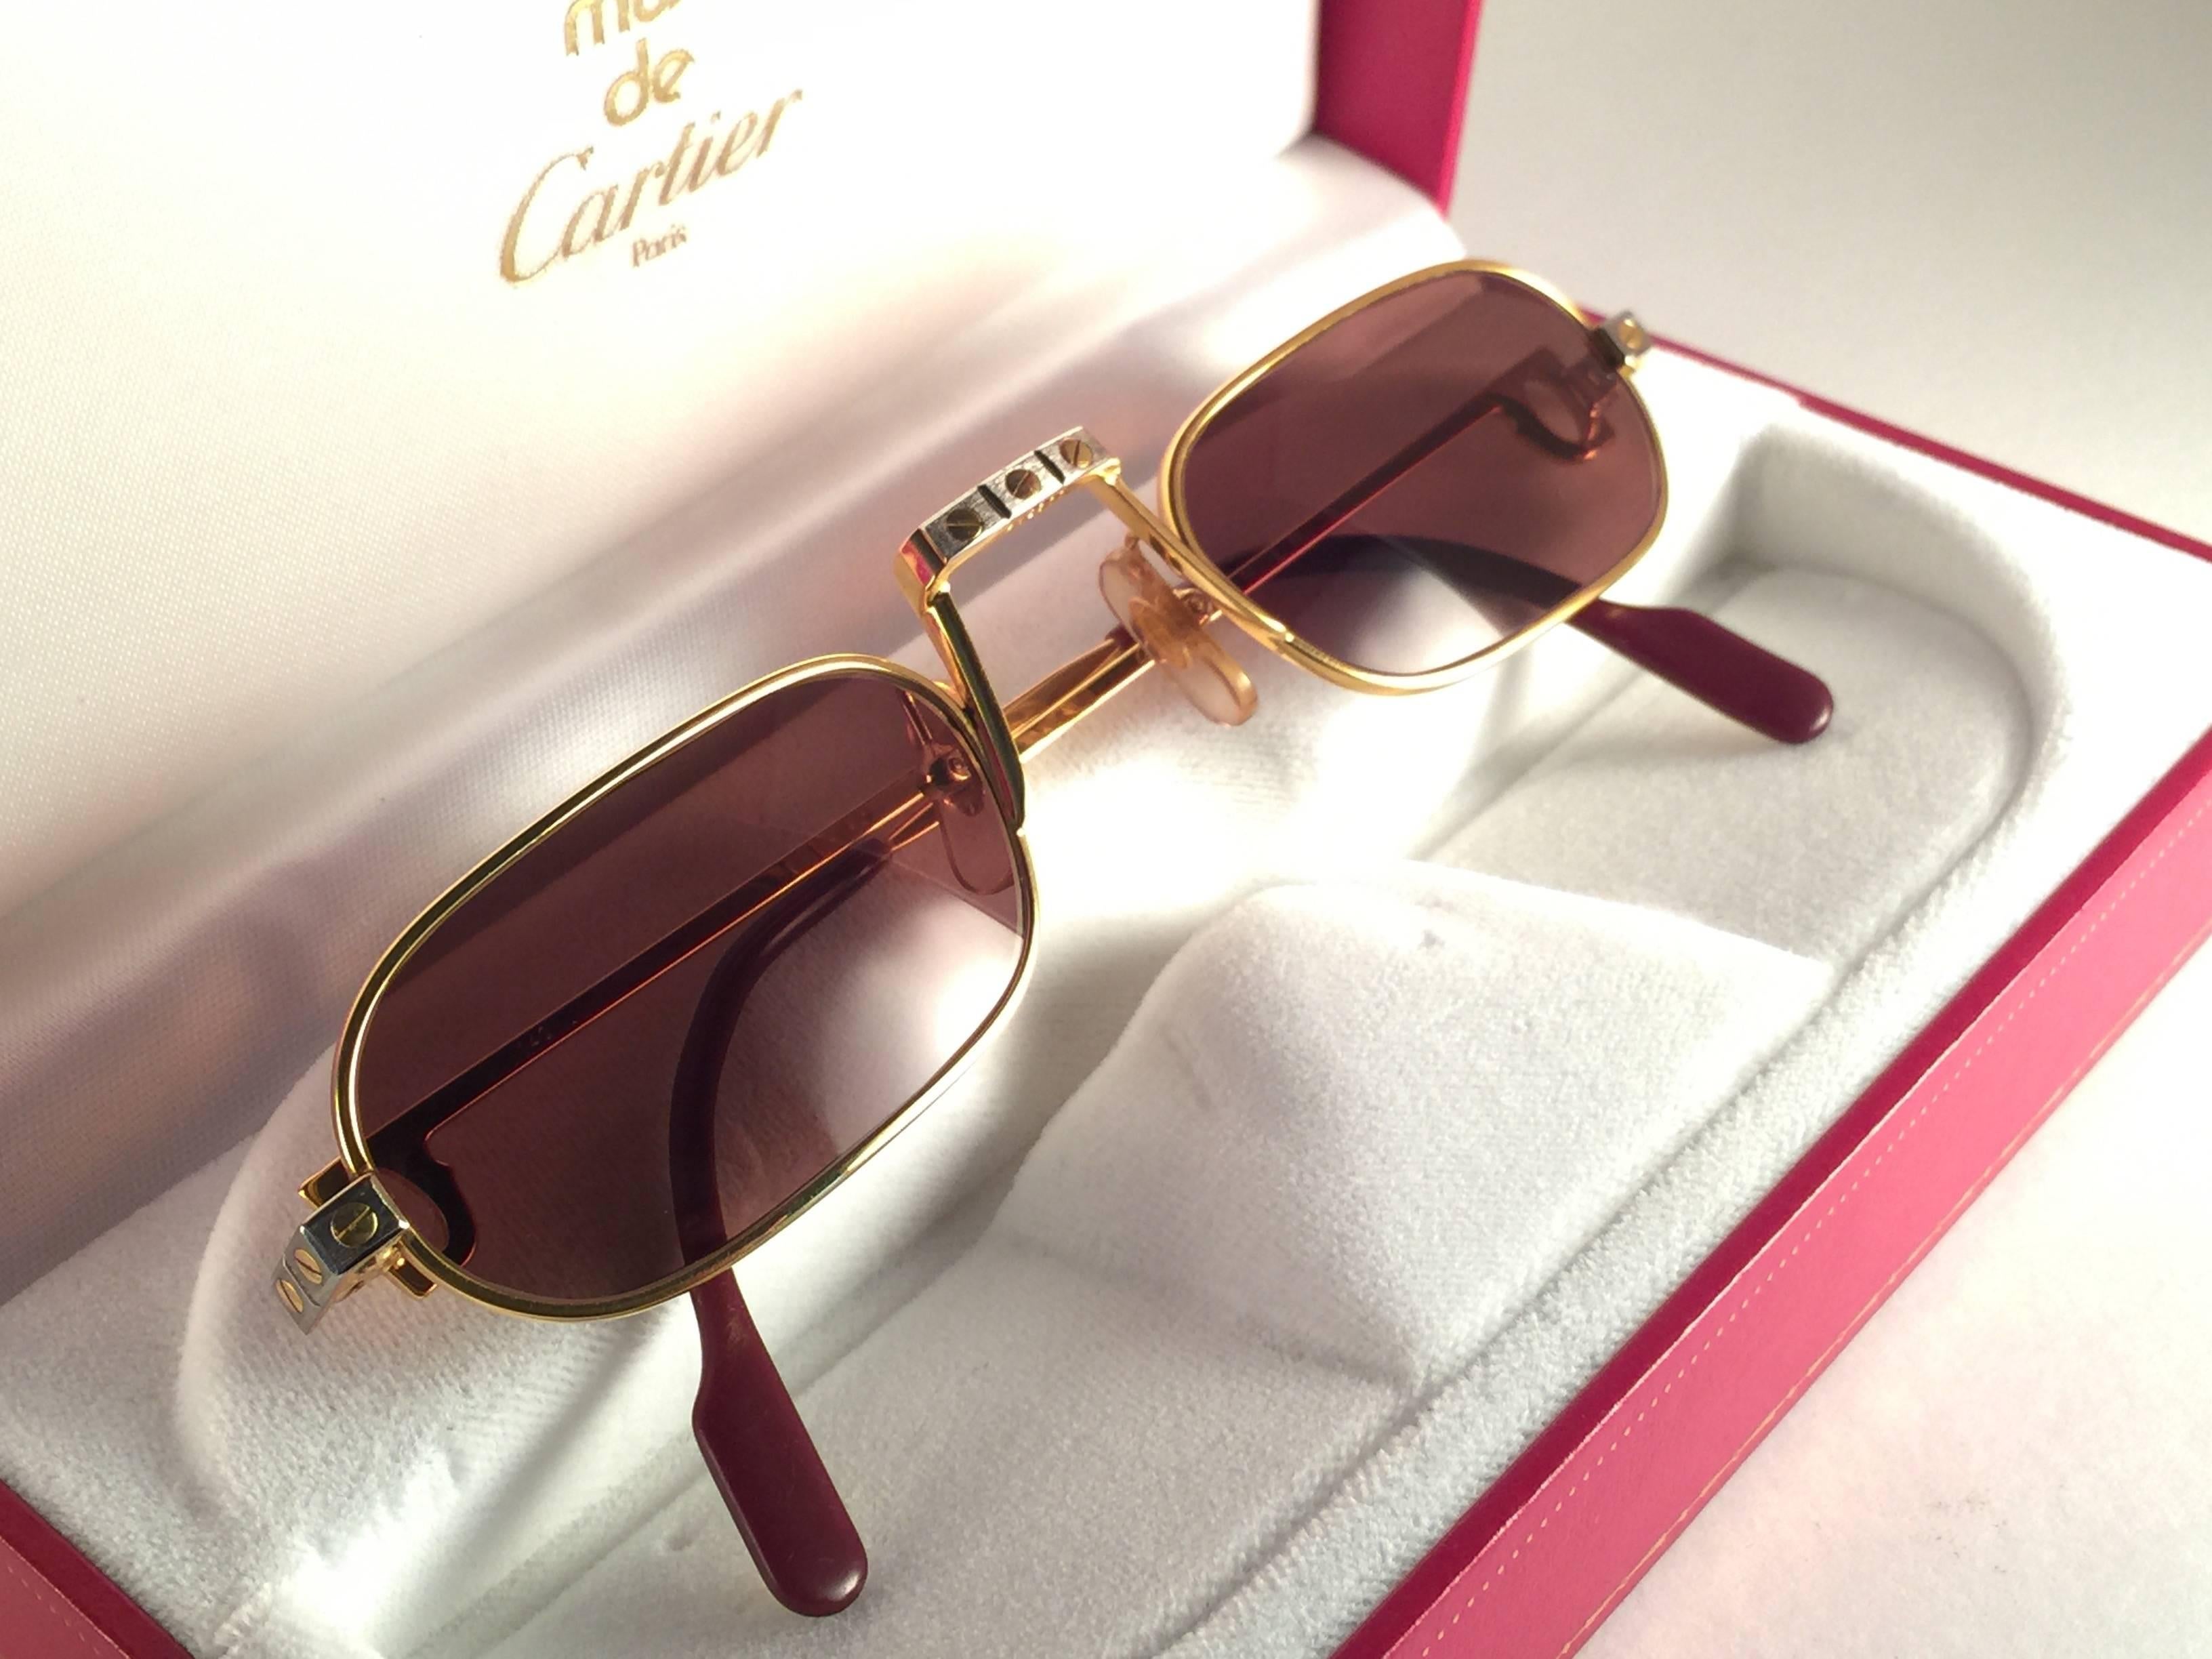 New Vintage Cartier Louis Santos demi lune sunglasses with new honey brown lenses. Perfect and fit for reading glasses. Frame is with the front and sides in yellow and white gold and the famous screws.
All hallmarks. Red enamel with Cartier gold